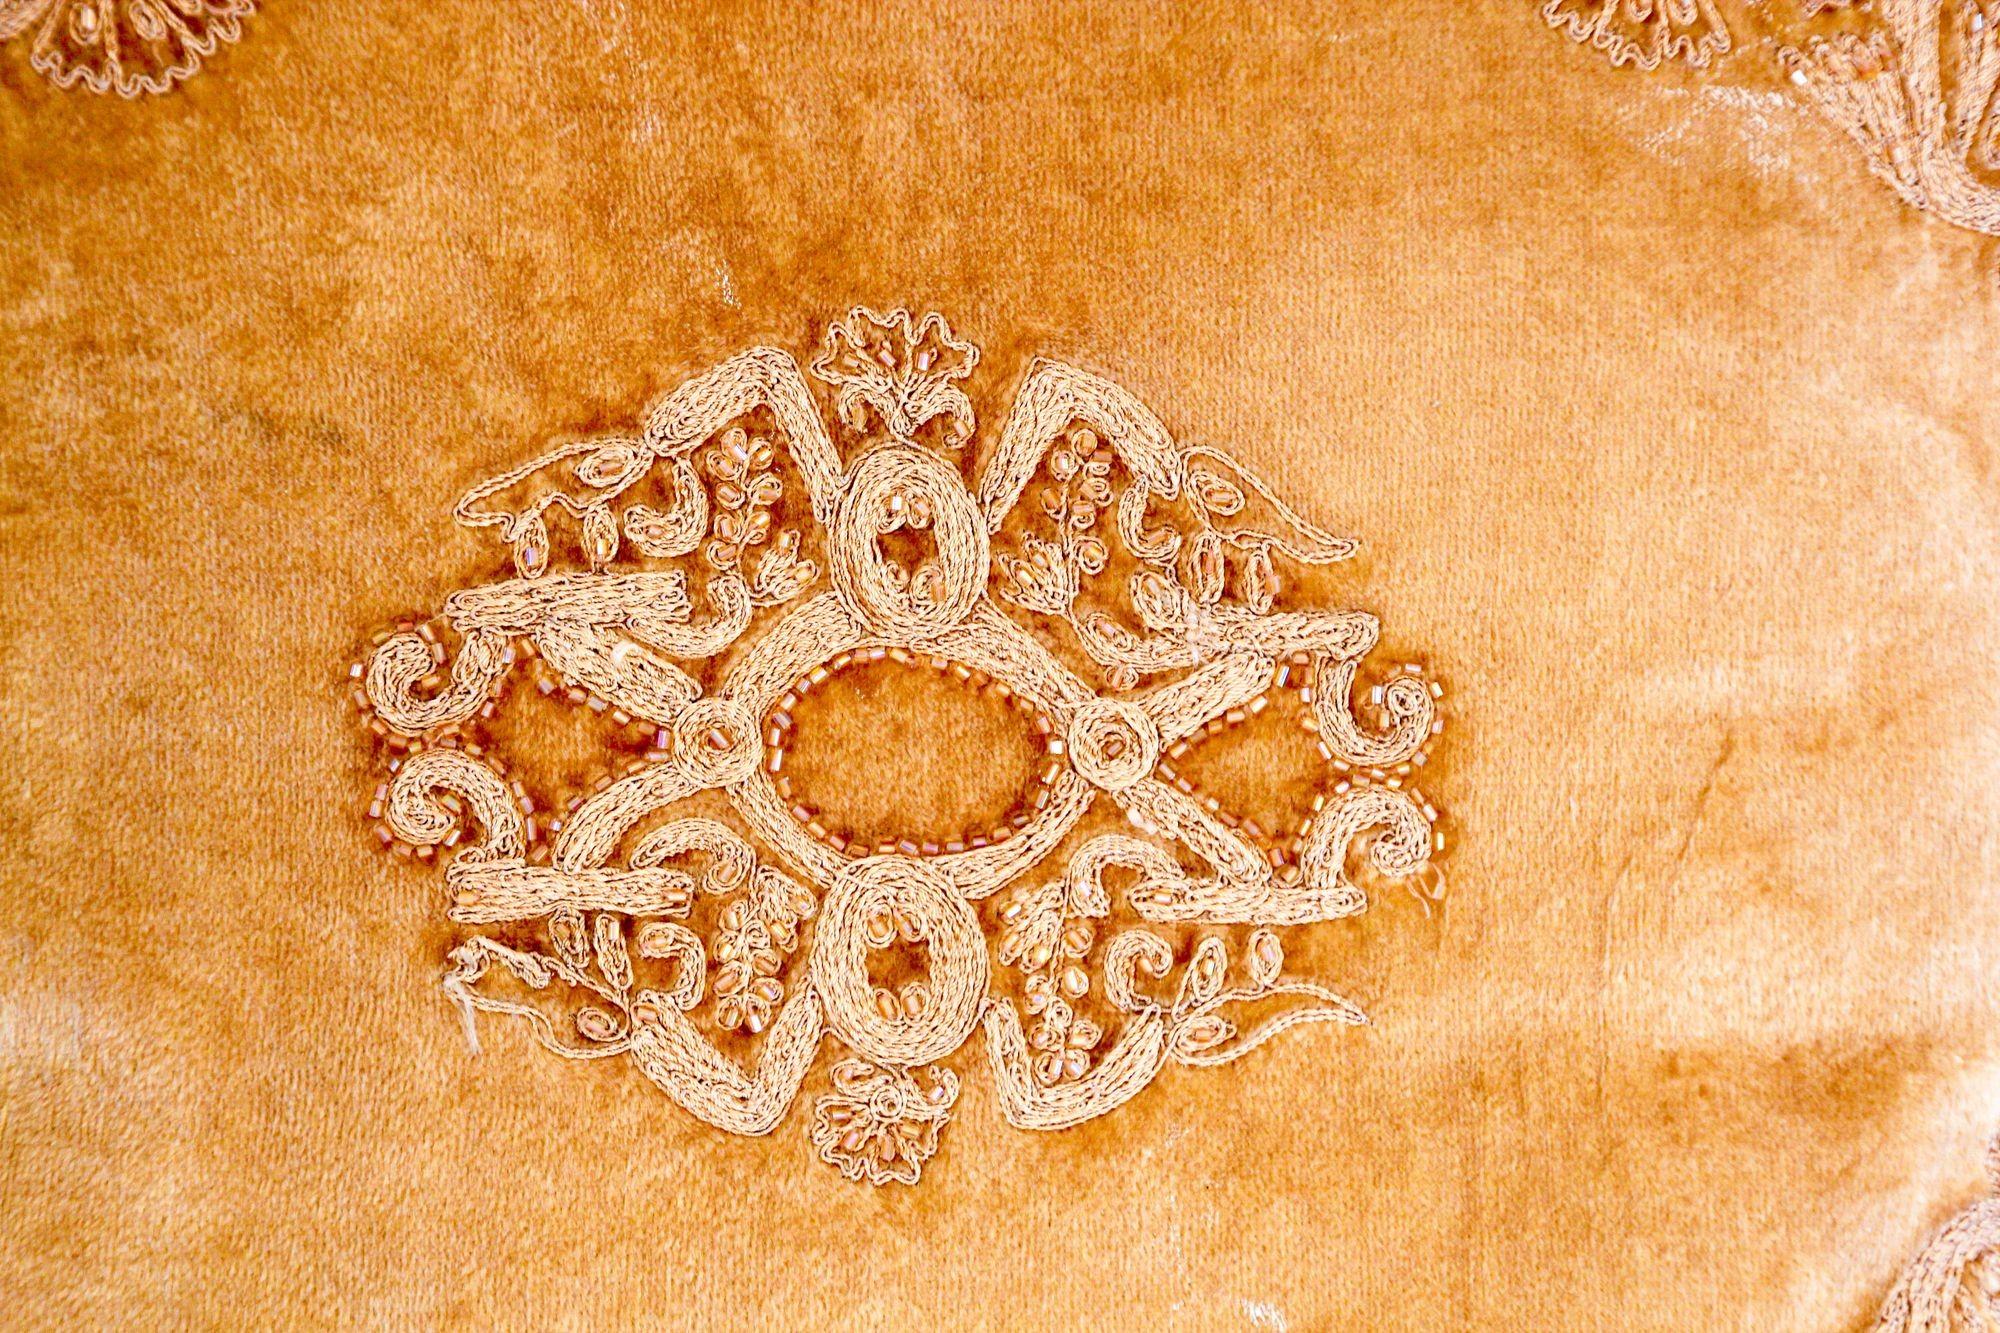 Vintage Velvet pillow tan color, embroidered with Moorish designs in gold and beige with glass beads on a central medallion and corners.
Great decorative Moorish style throw pillow to add to your Baroque, Bohemian or Moroccan decor.